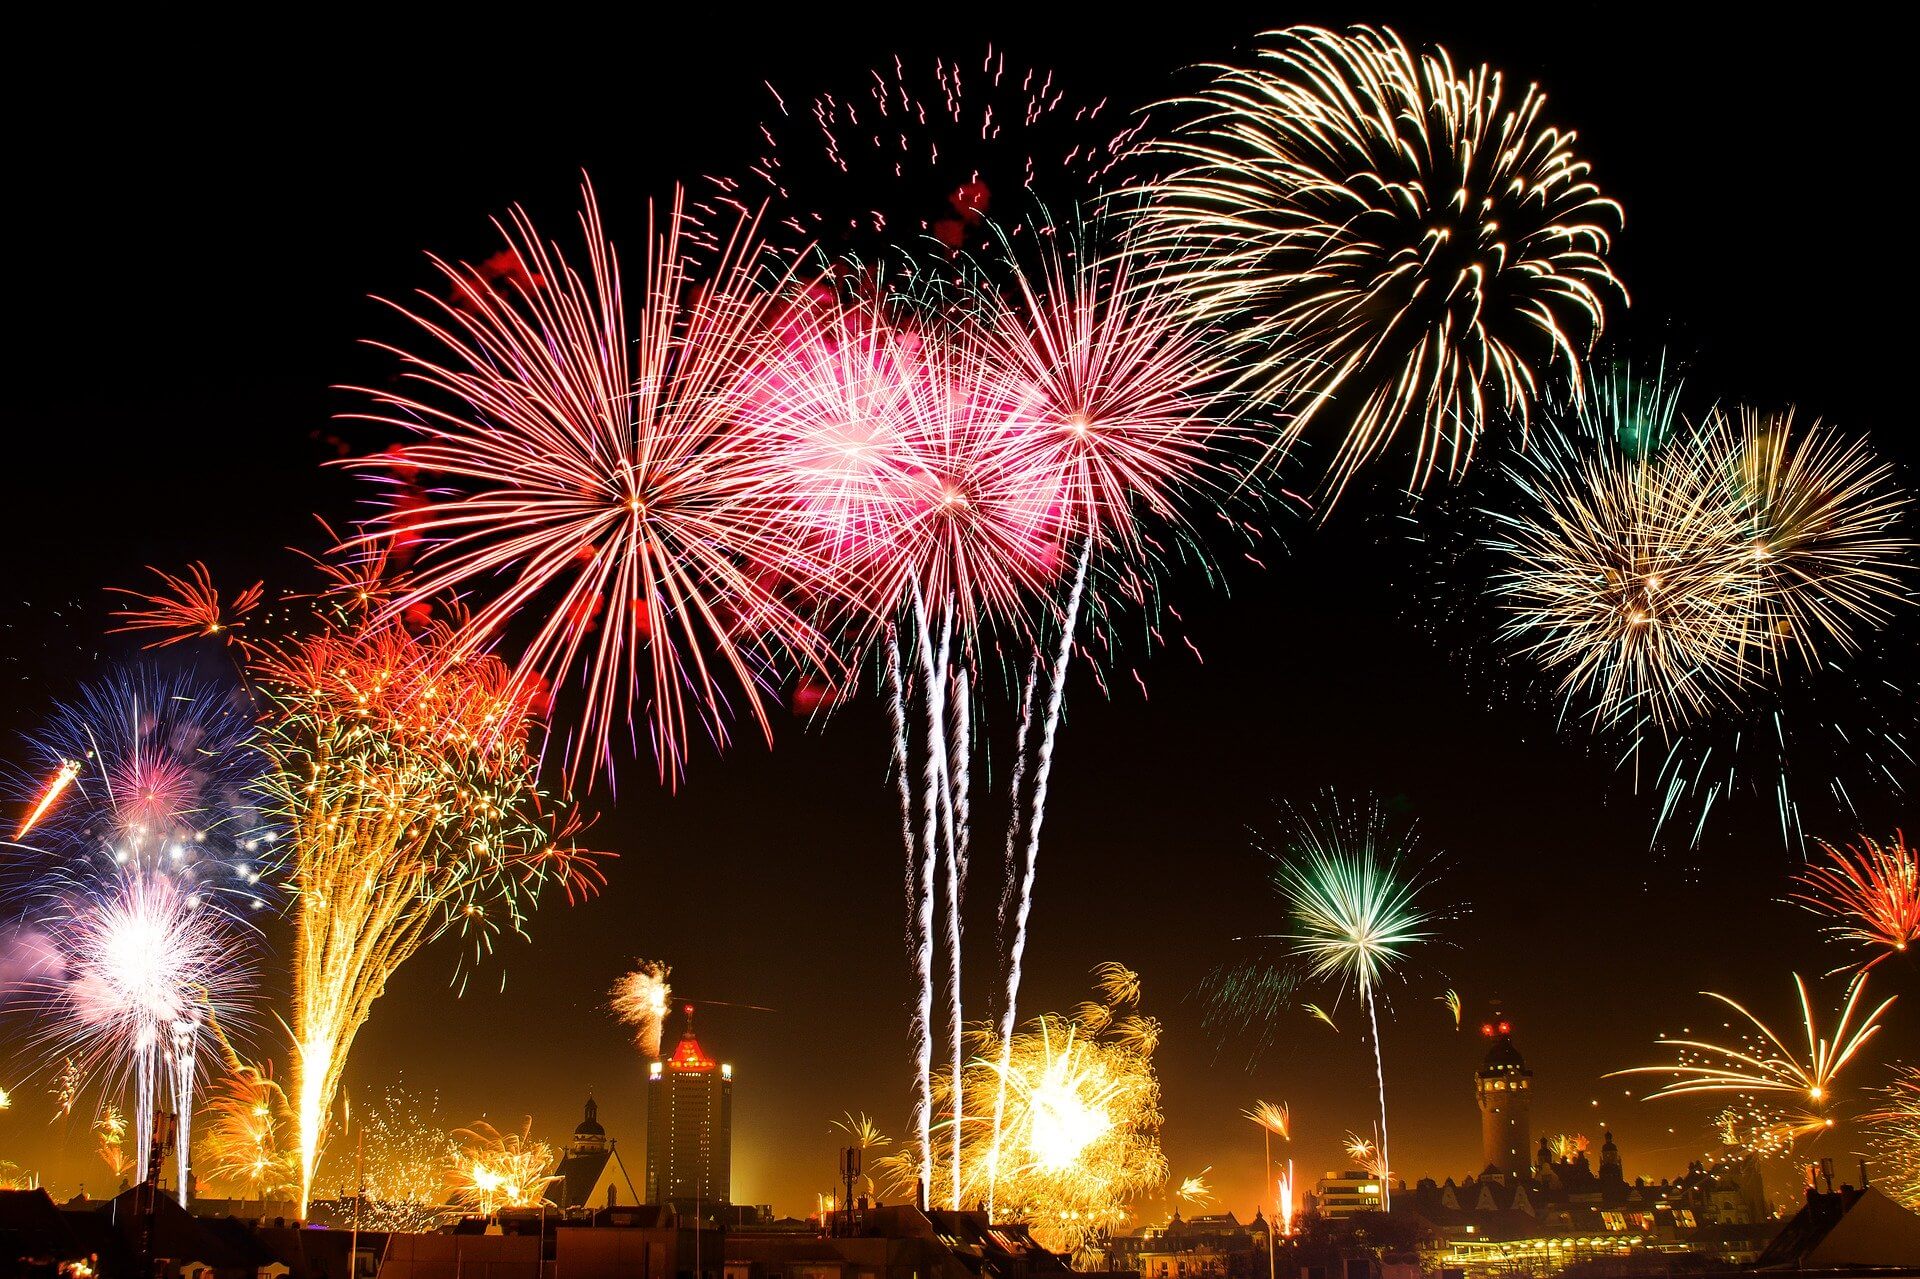 4 Considerations to Make Before Using Fireworks at Your Party